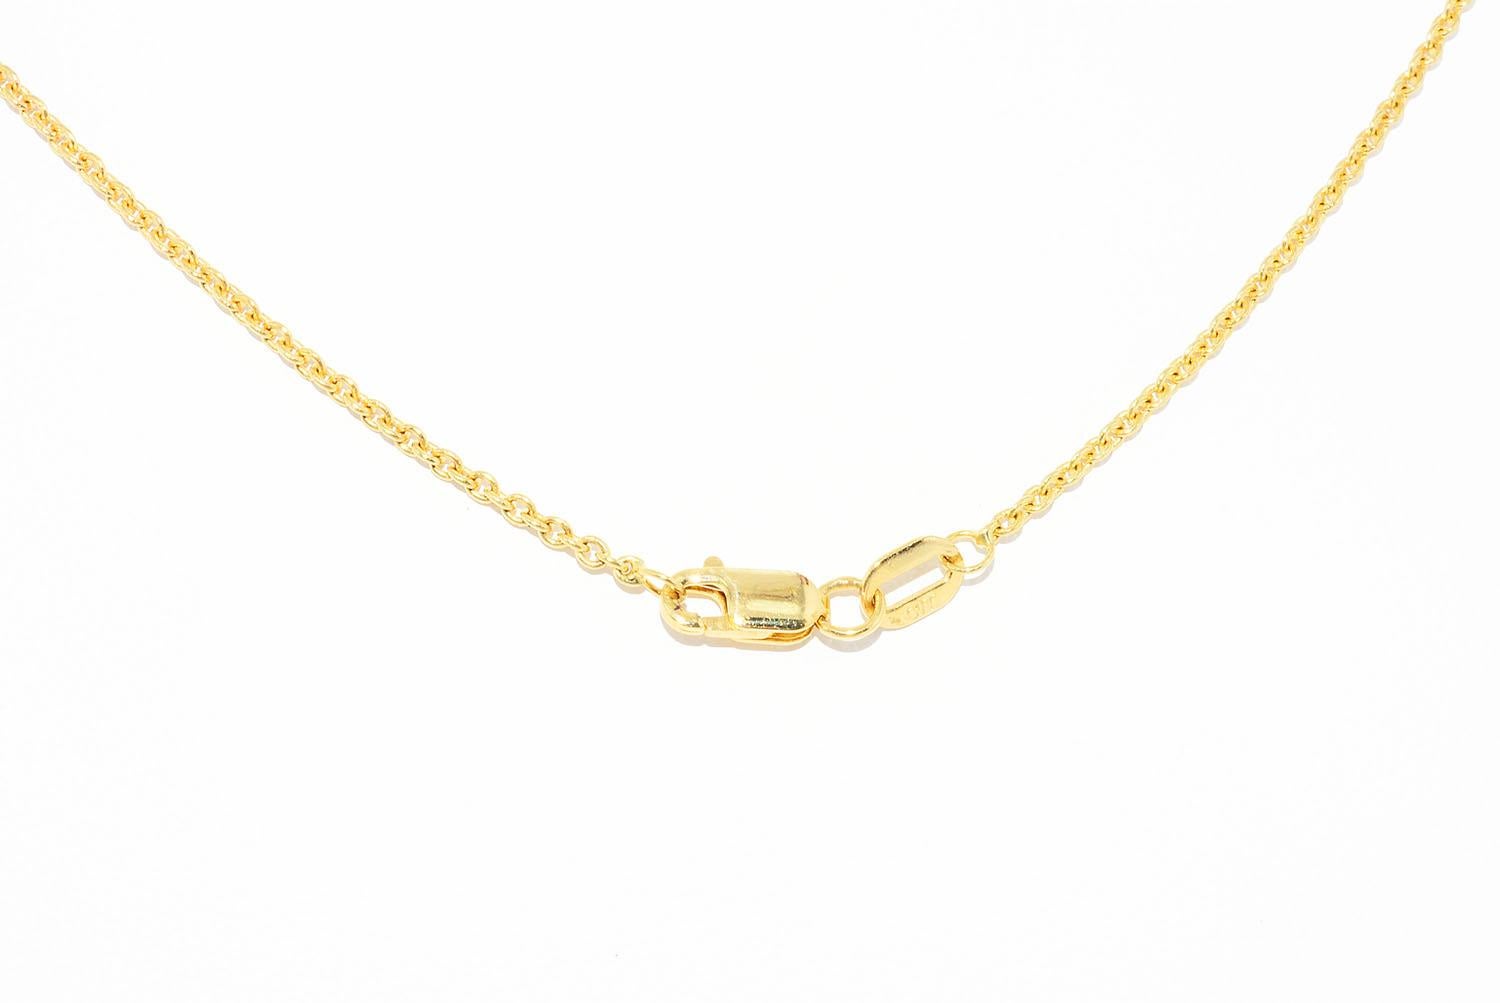 Women's or Men's 1.56 CT Diamonds By The Yard Necklace 18k Yellow Gold For Sale